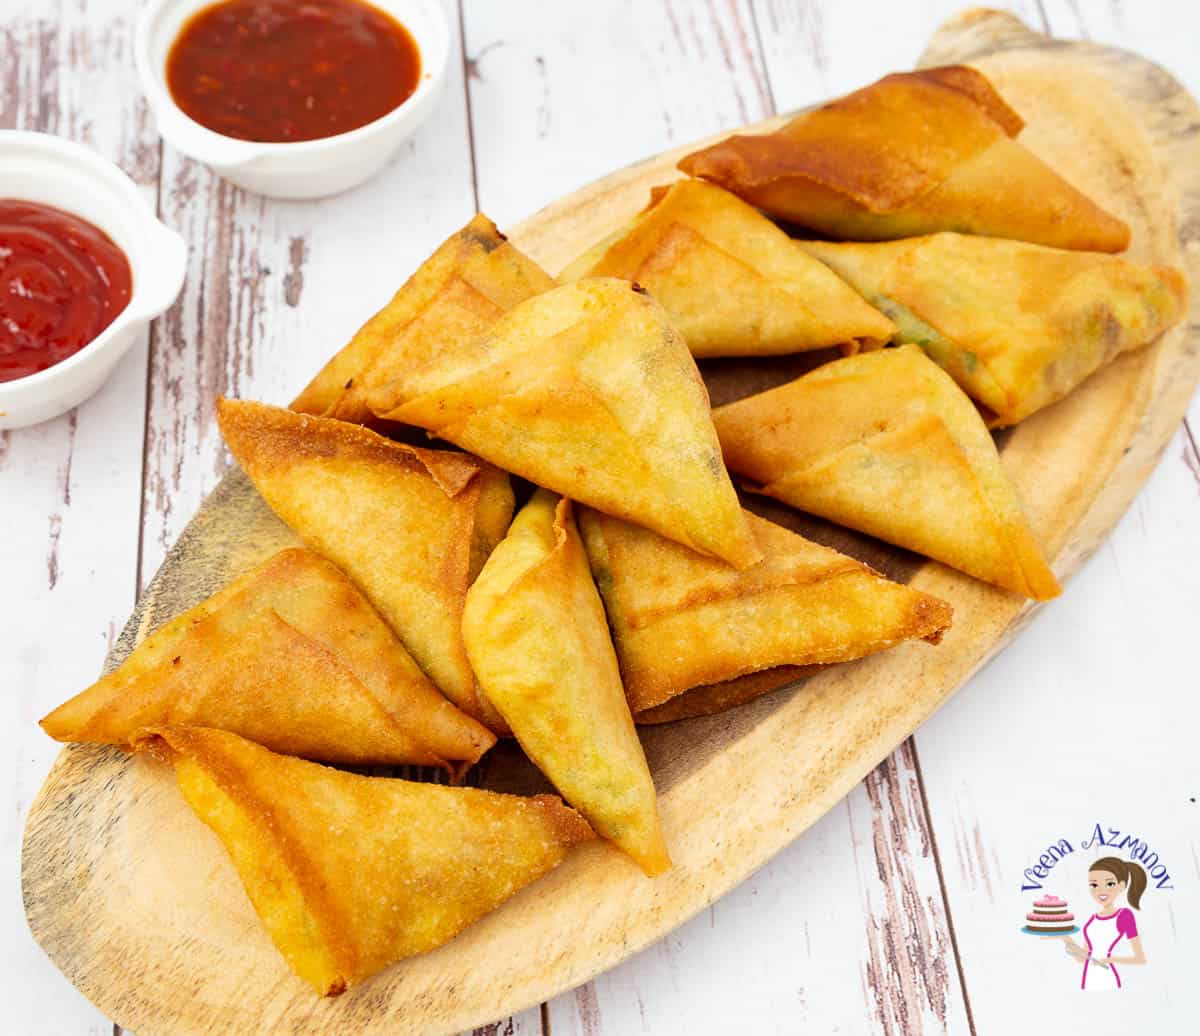 A stack of samosas on a wooden board.